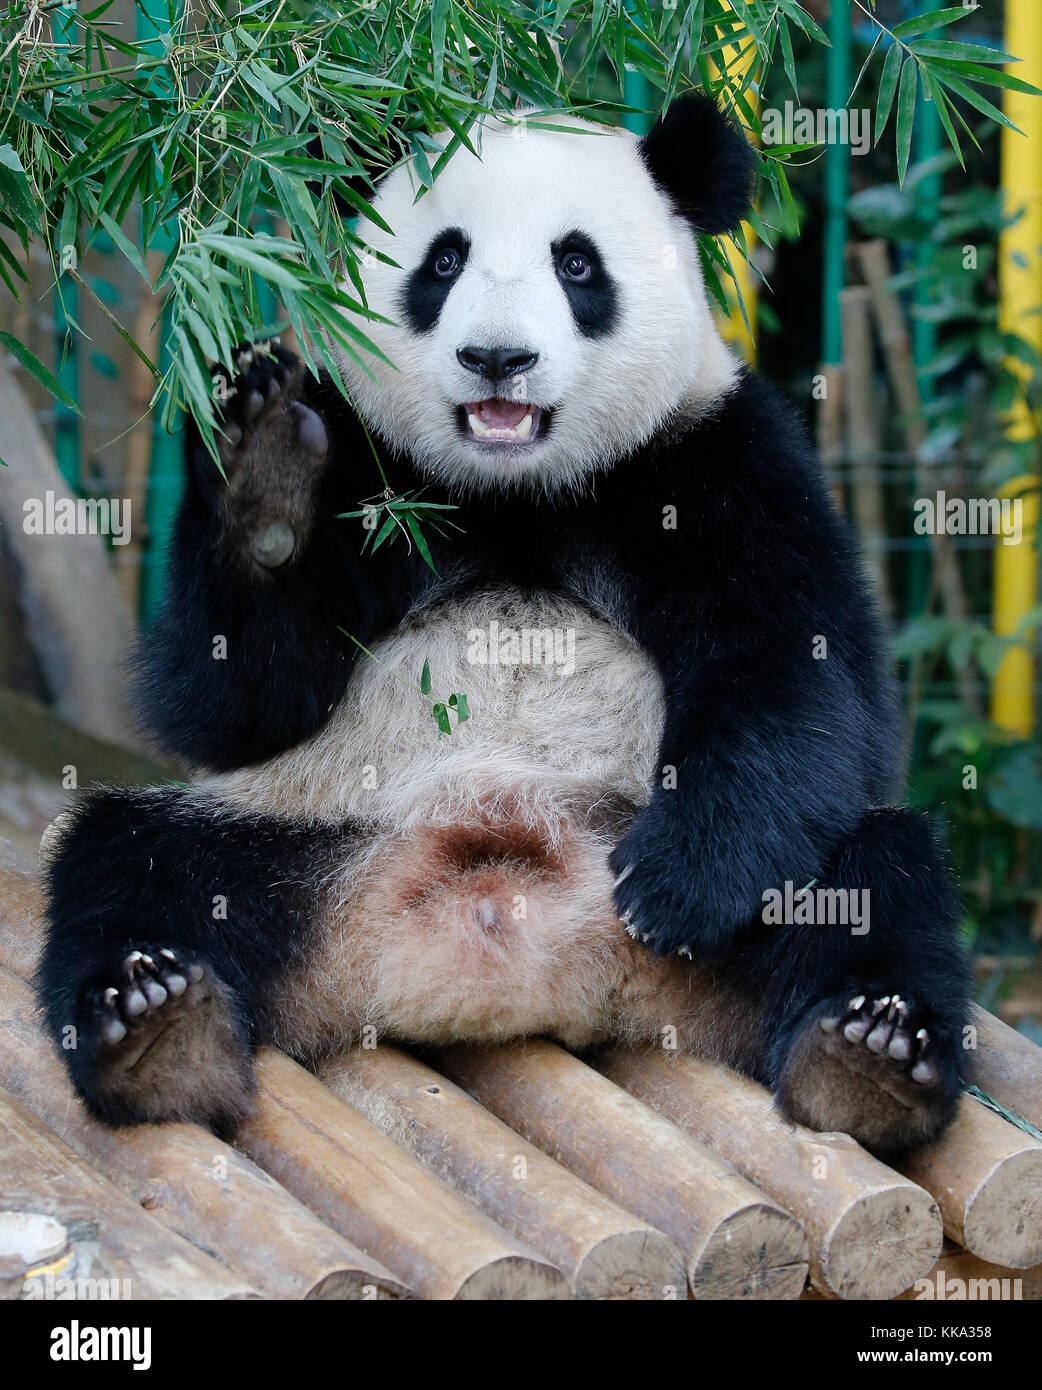 Nuan Nuan (means warmth), the first Malaysian-born Panda cub is sitting on the wooden bench at the Panda Conservation Centre in Kuala Lumpur, Malaysia Stock Photo